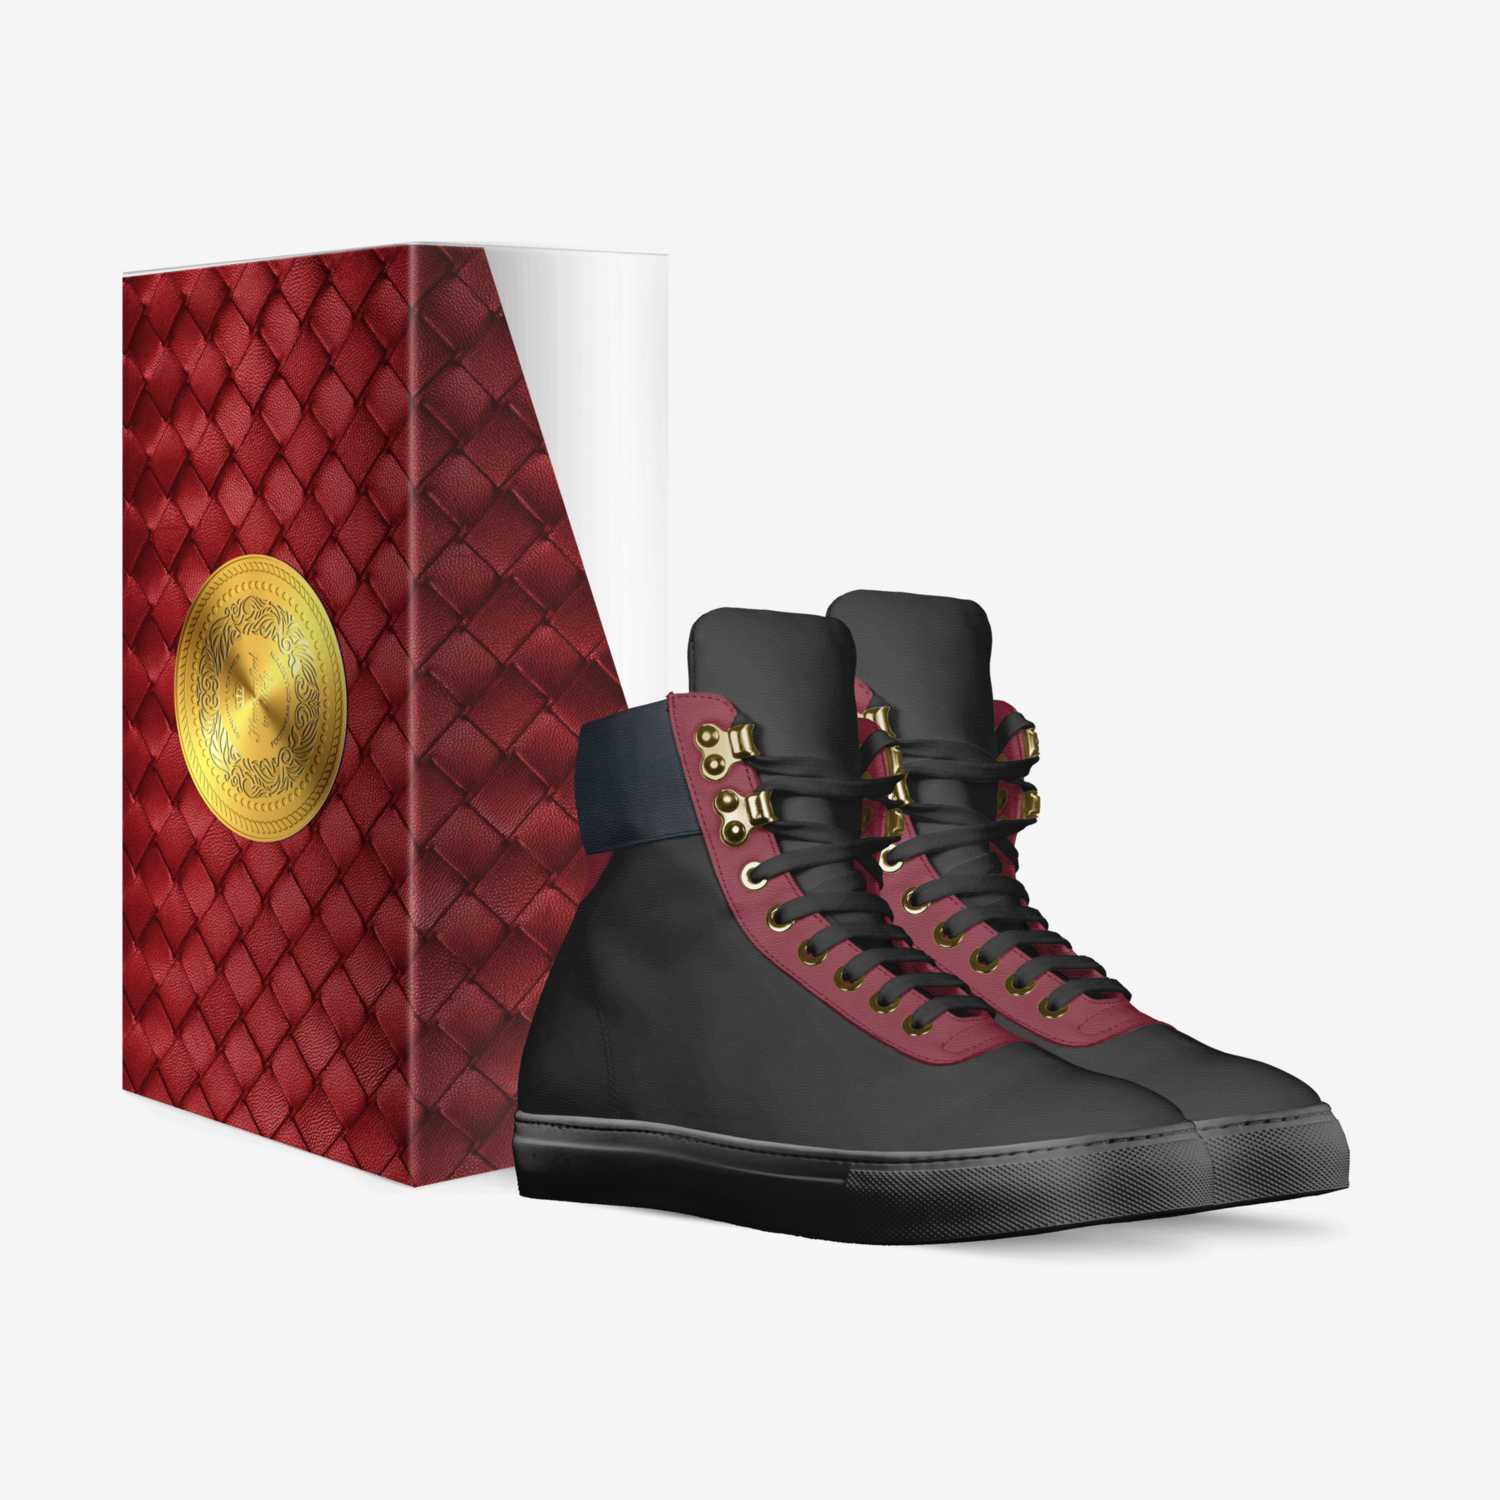 Step Out Luxury  custom made in Italy shoes by Curtis Keys | Box view